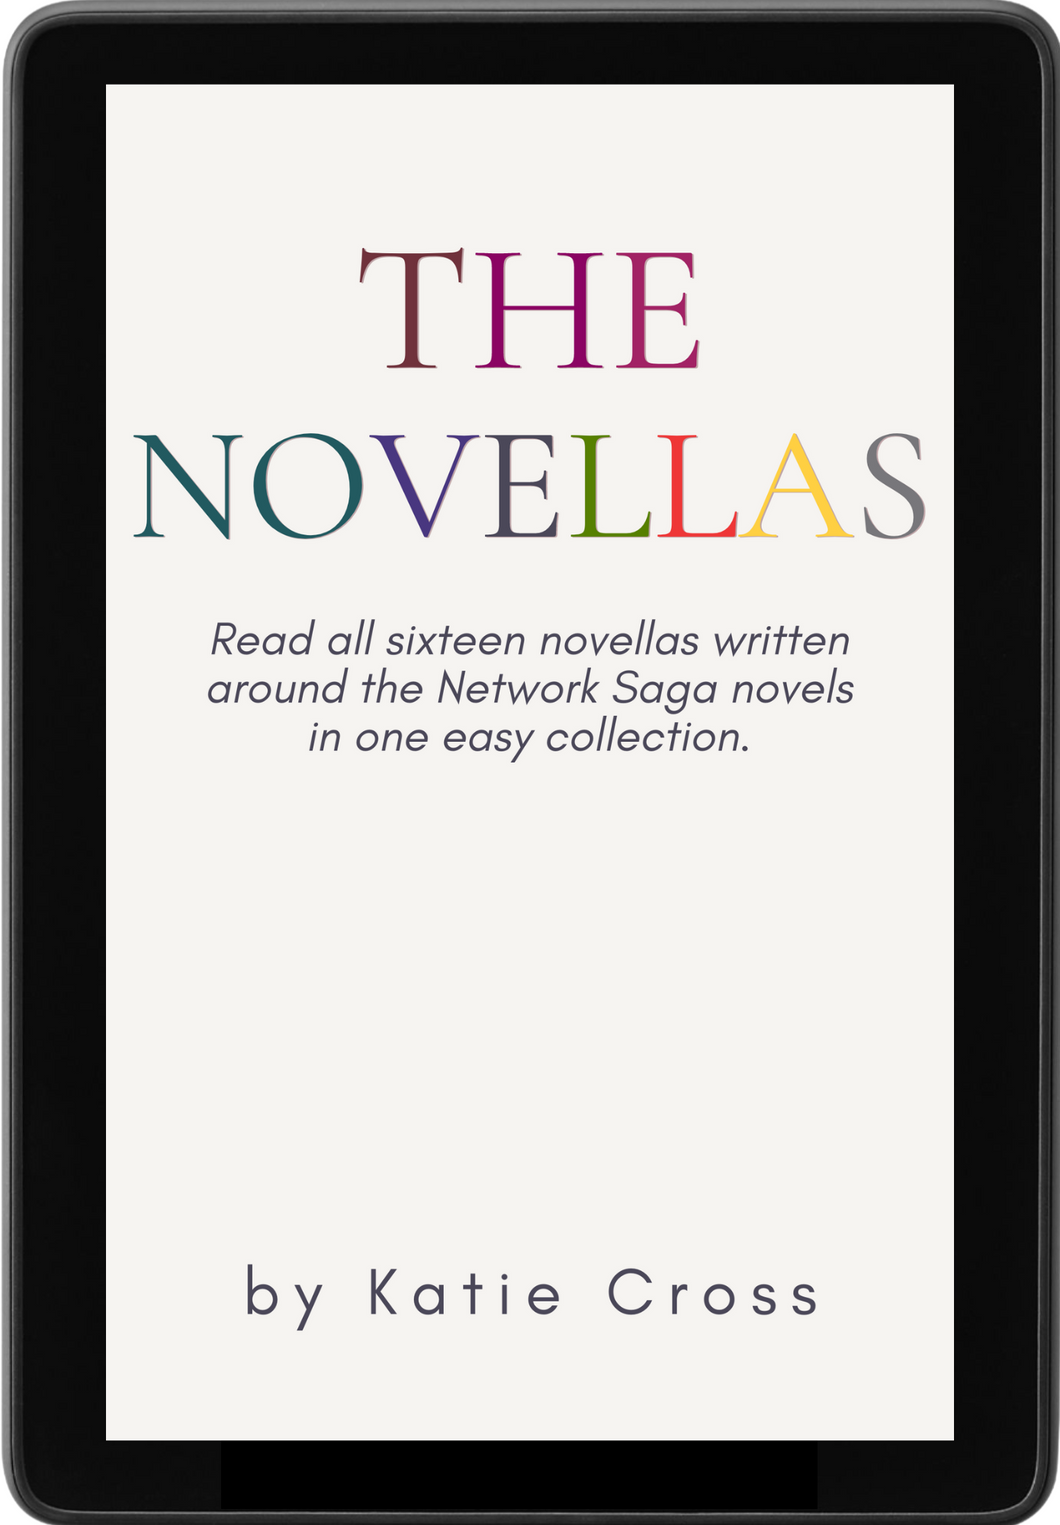 The Novellas Collection | The Network Series Novellas